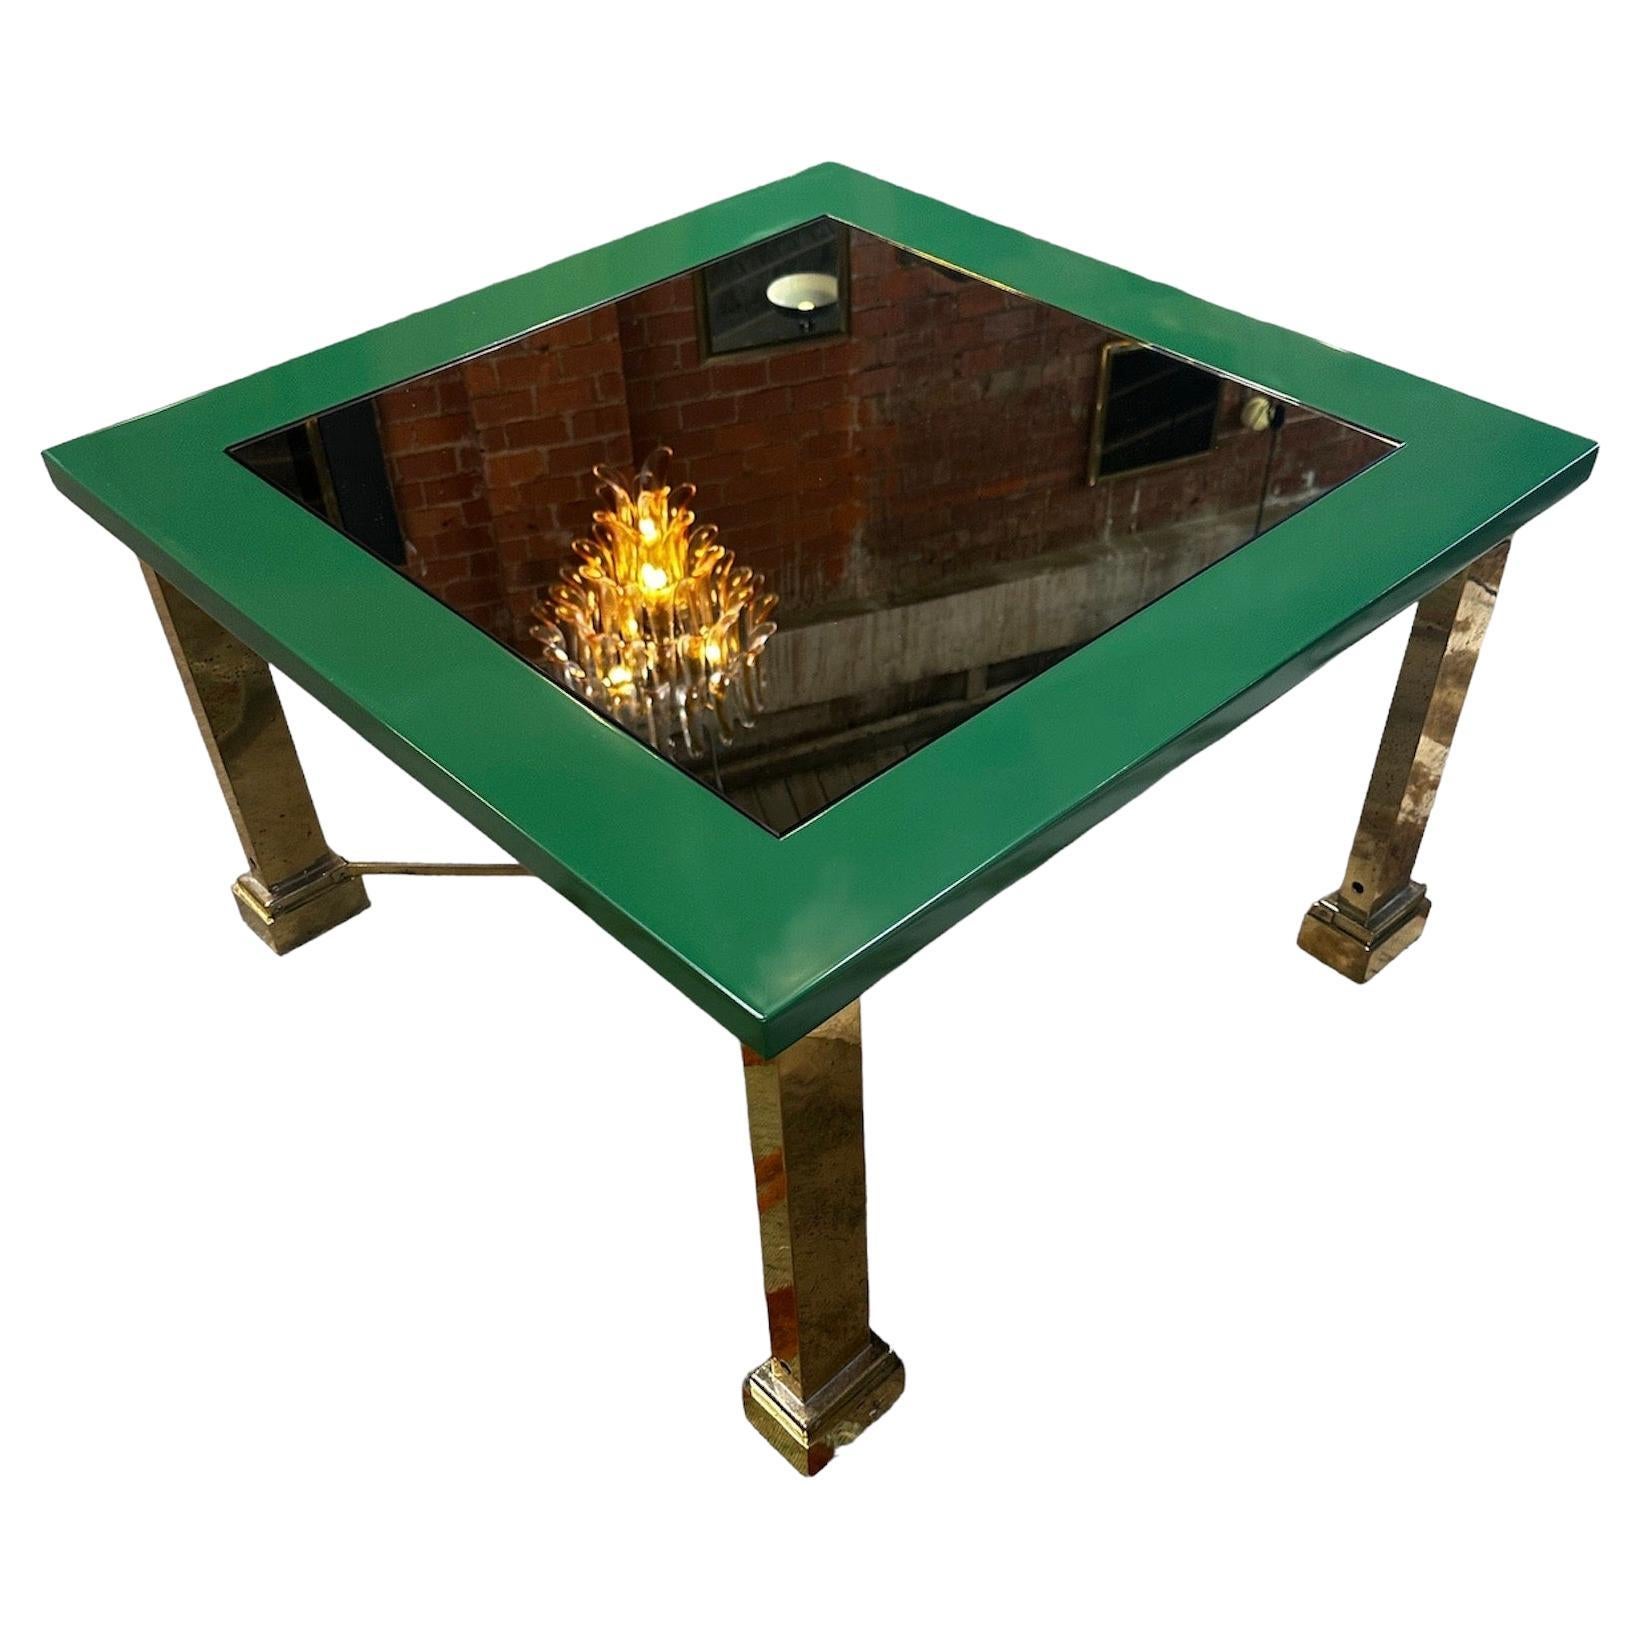 Midcentury Italian Green and Brass Coffee Table 1980s by Sergio Bucci